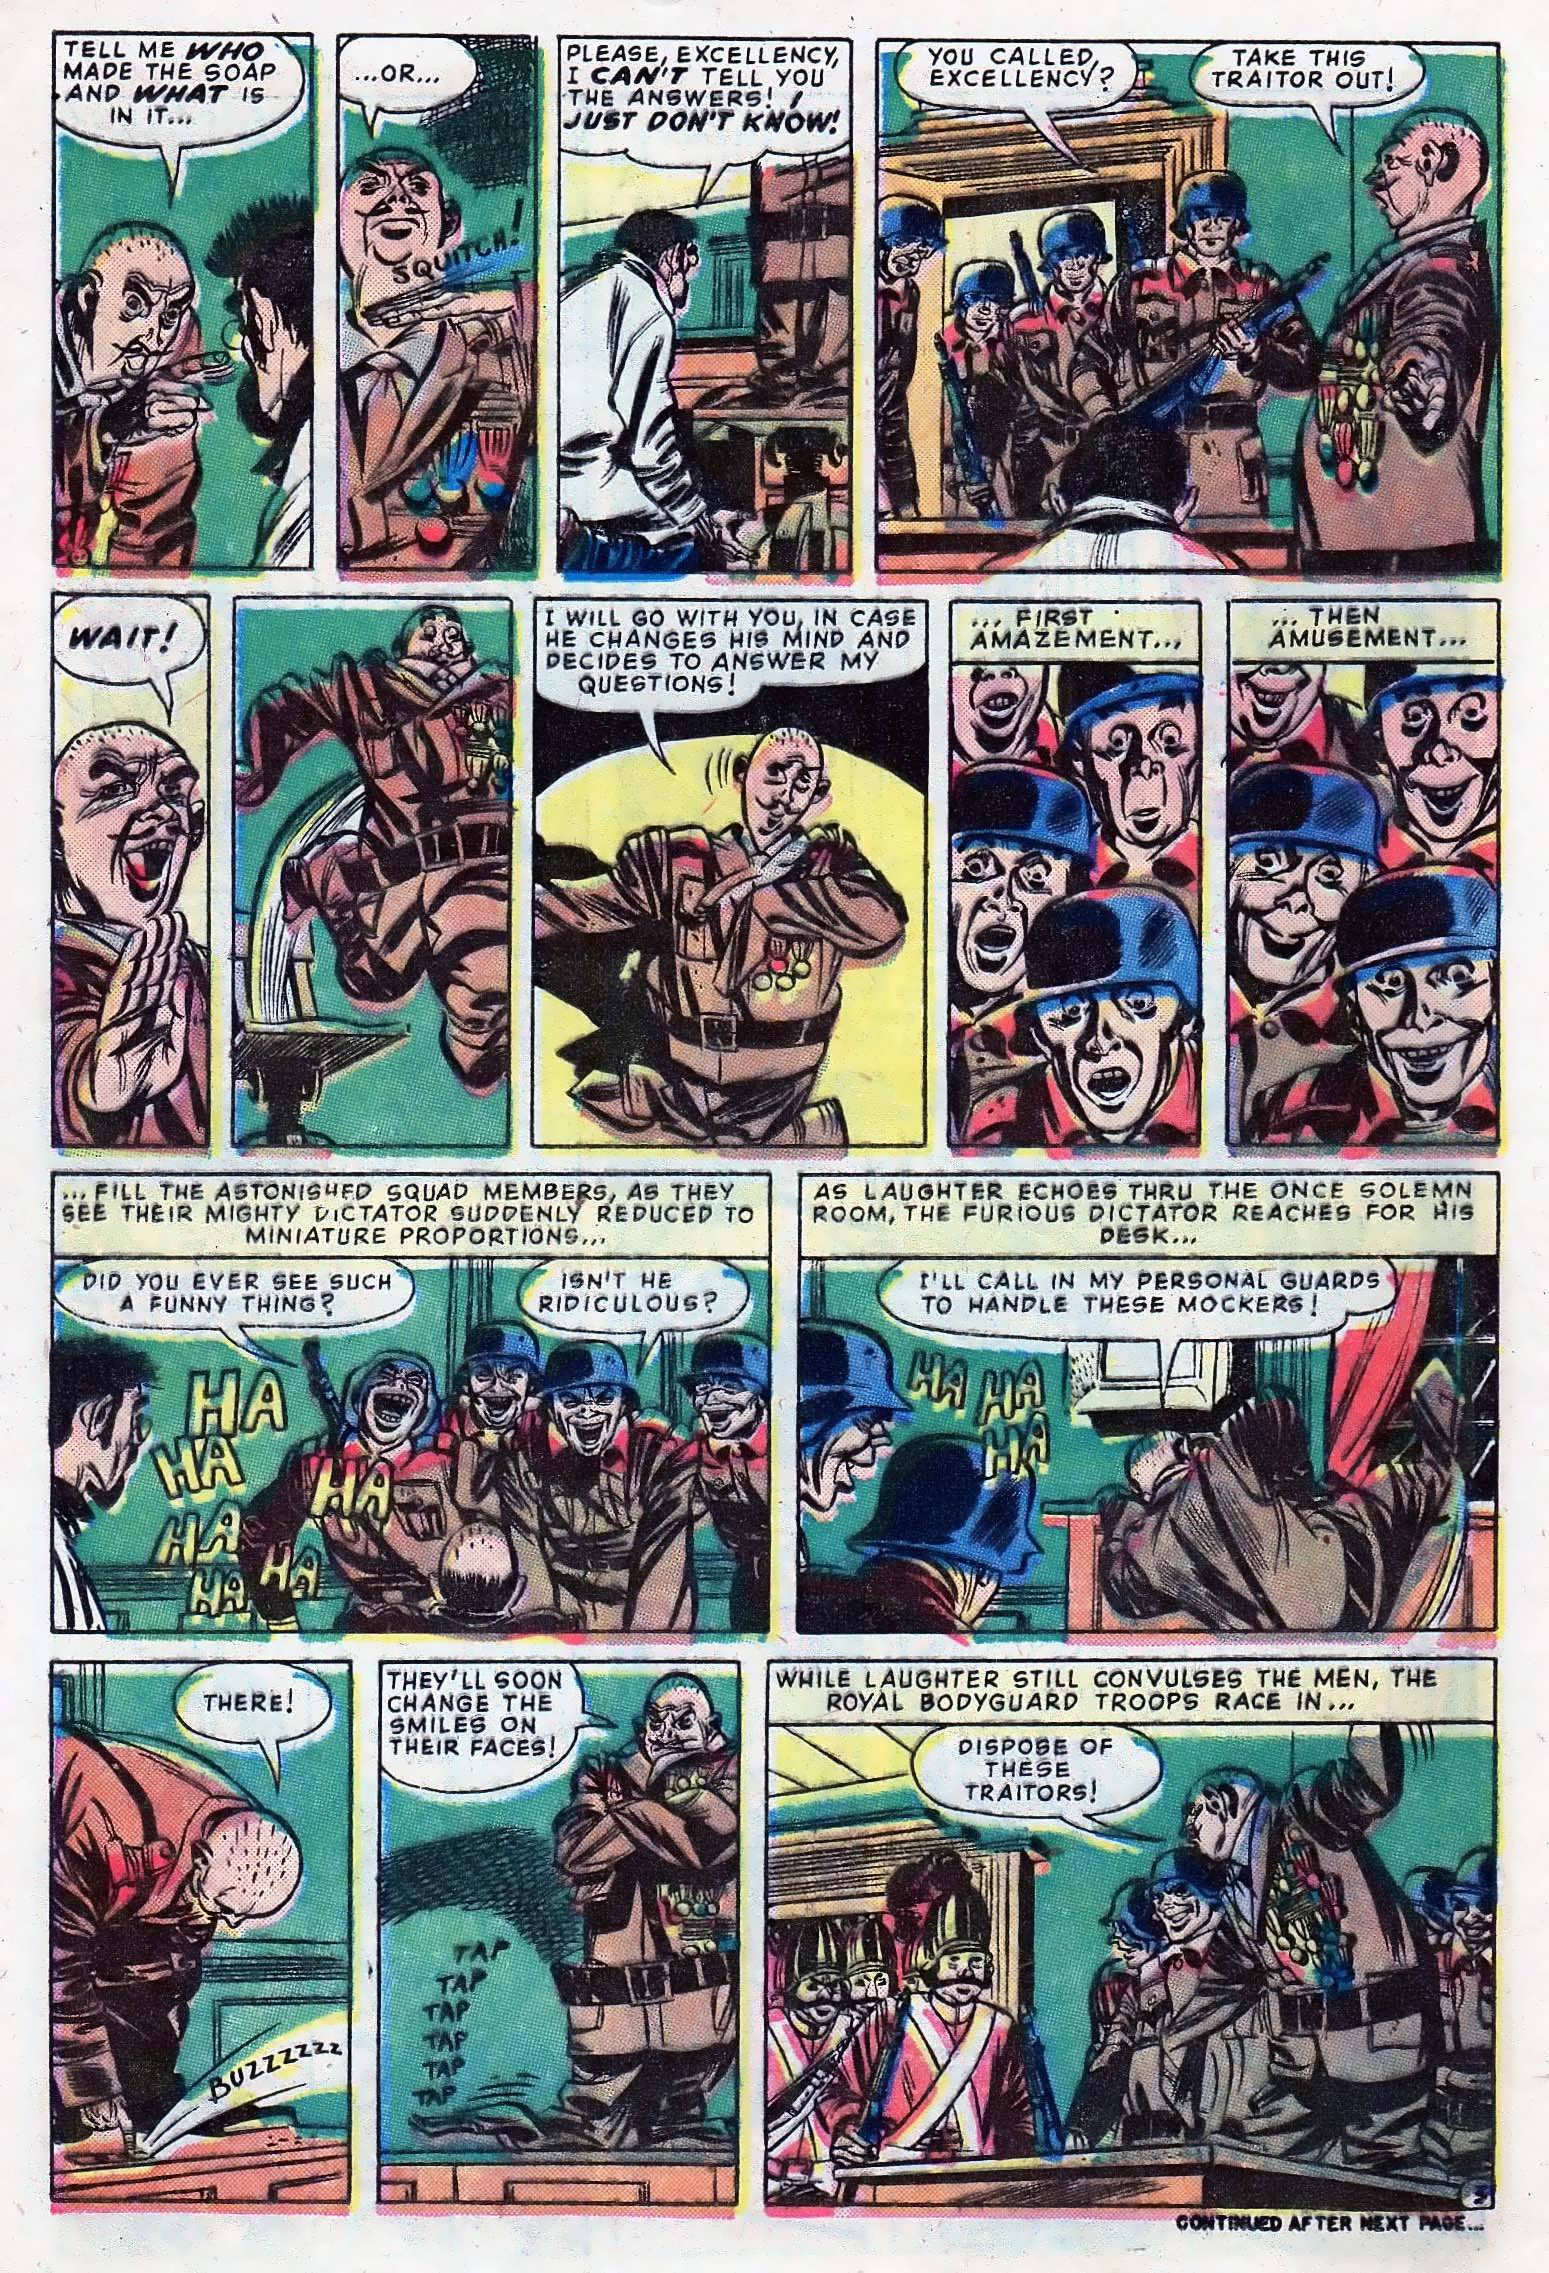 Marvel Tales (1949) 142 Page 11